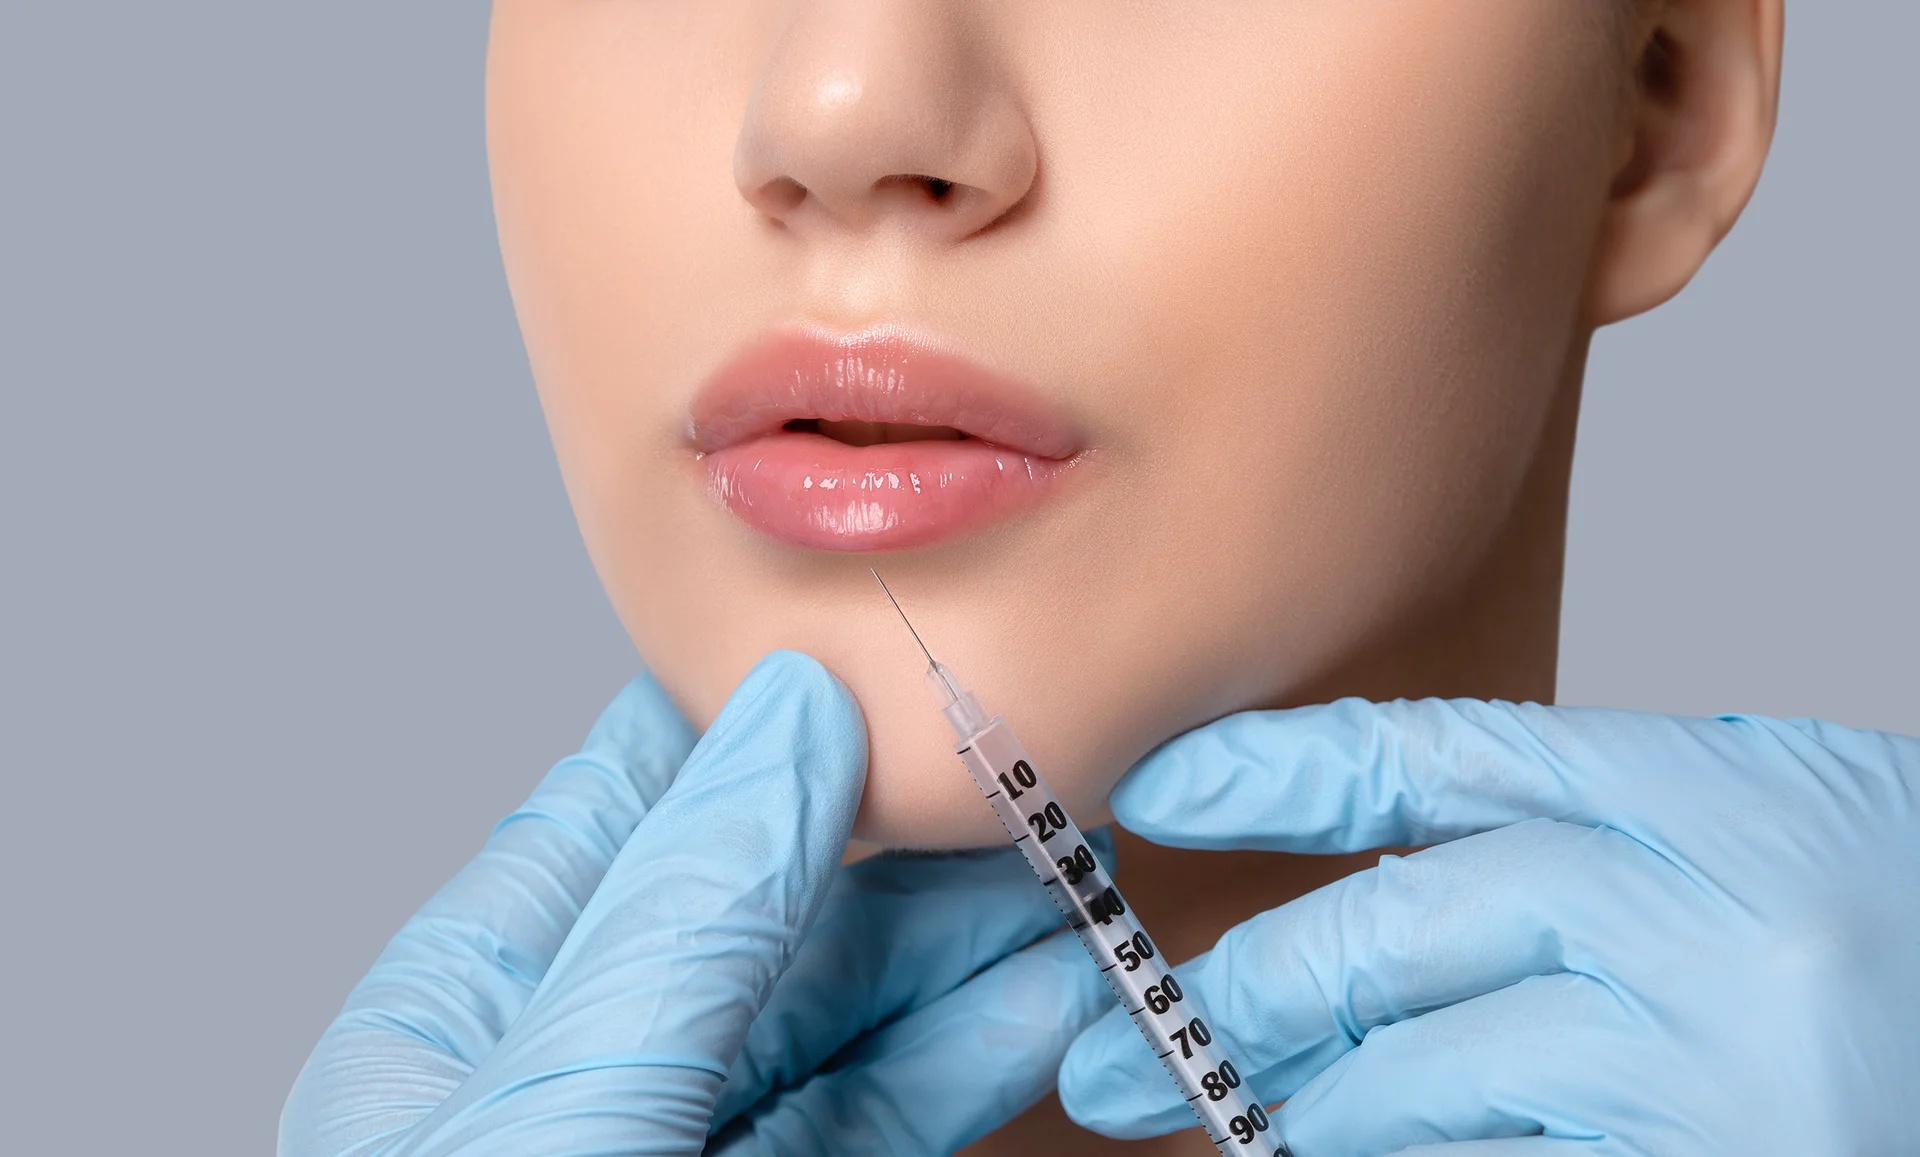 a woman receives lip filler injections|a woman with plump lips|a portrait of a relaxed